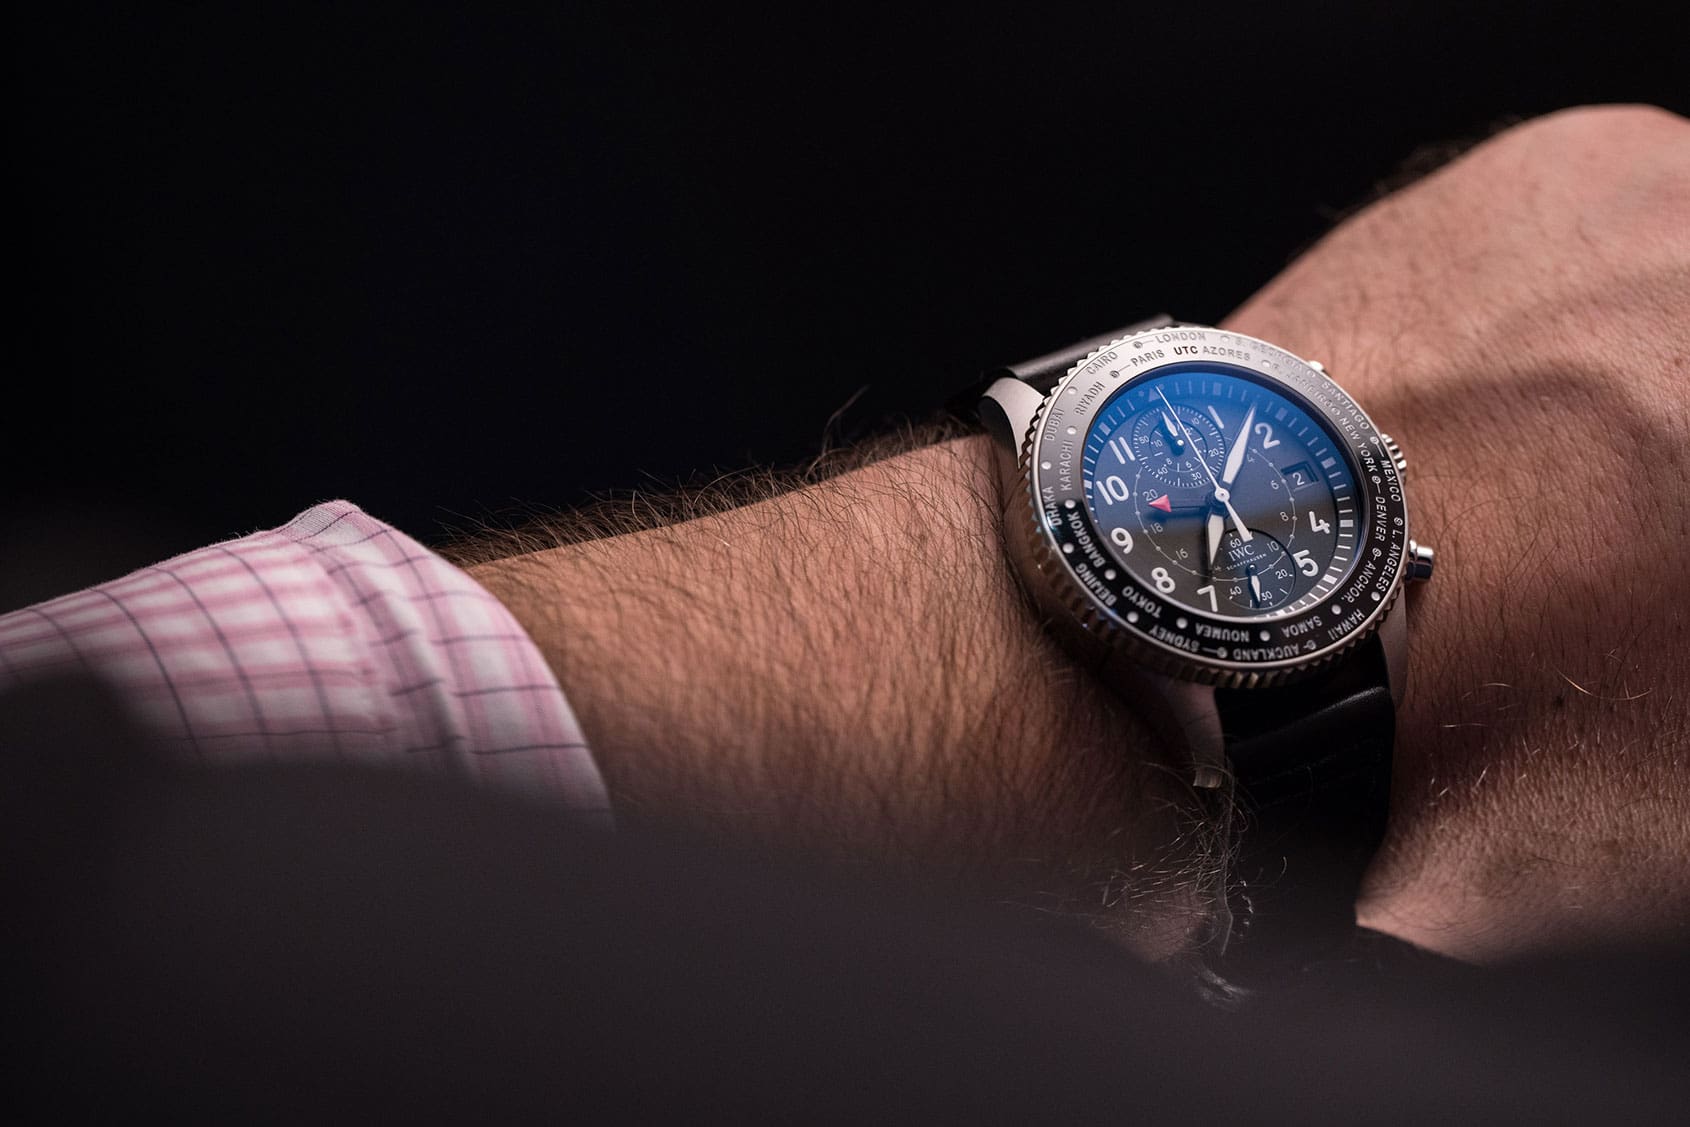 EDITOR’S PICK: IWC get busy with the Timezoner Chronograph